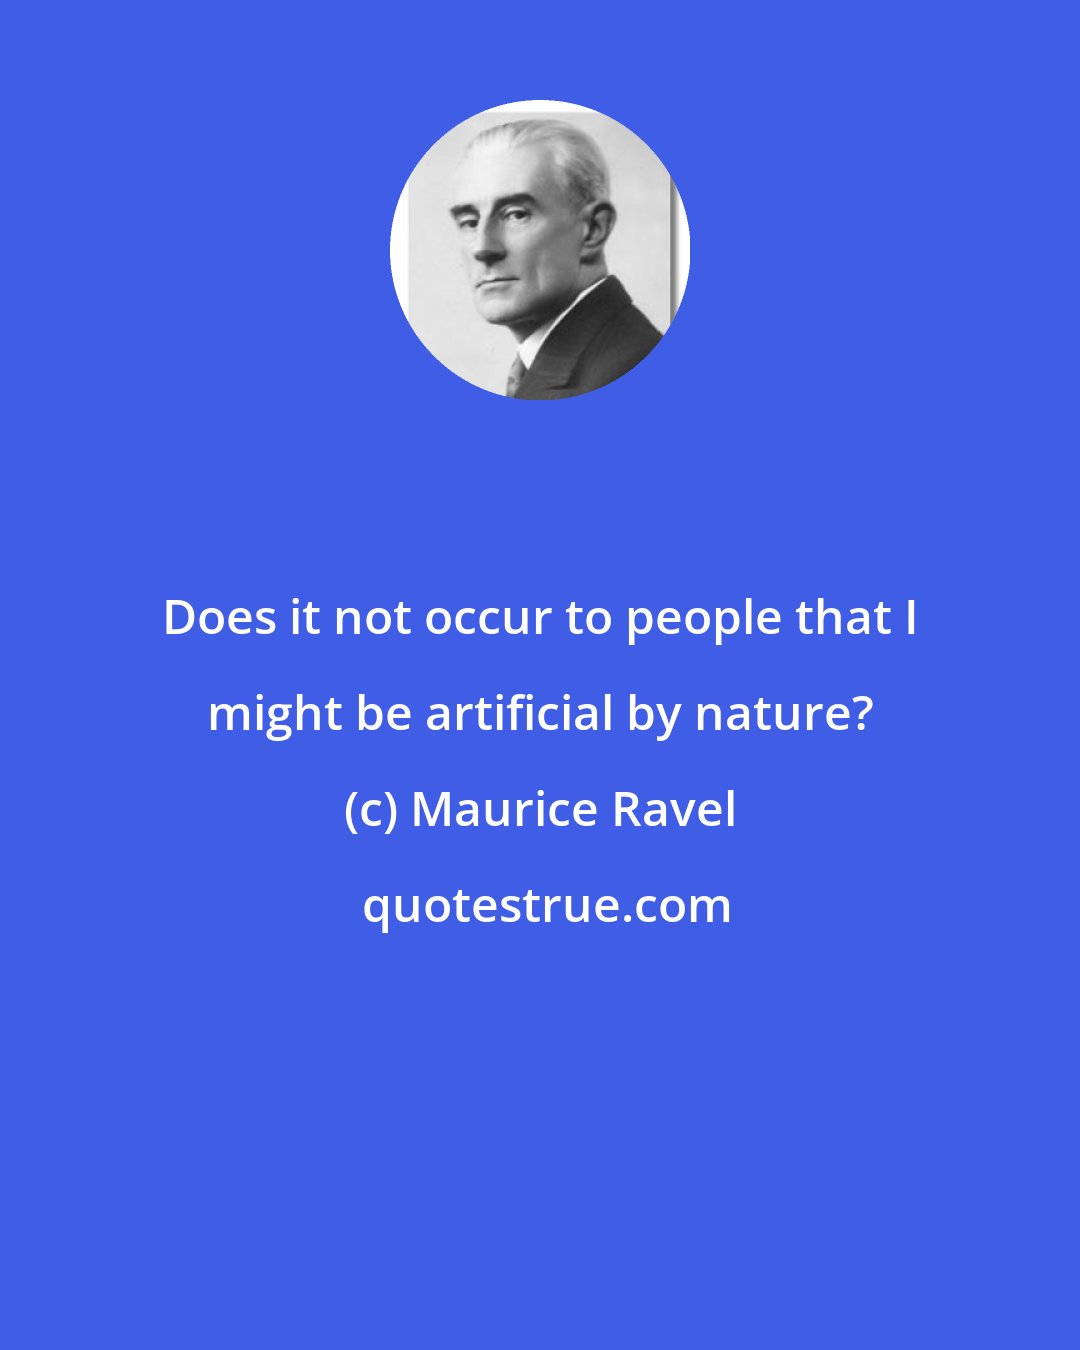 Maurice Ravel: Does it not occur to people that I might be artificial by nature?